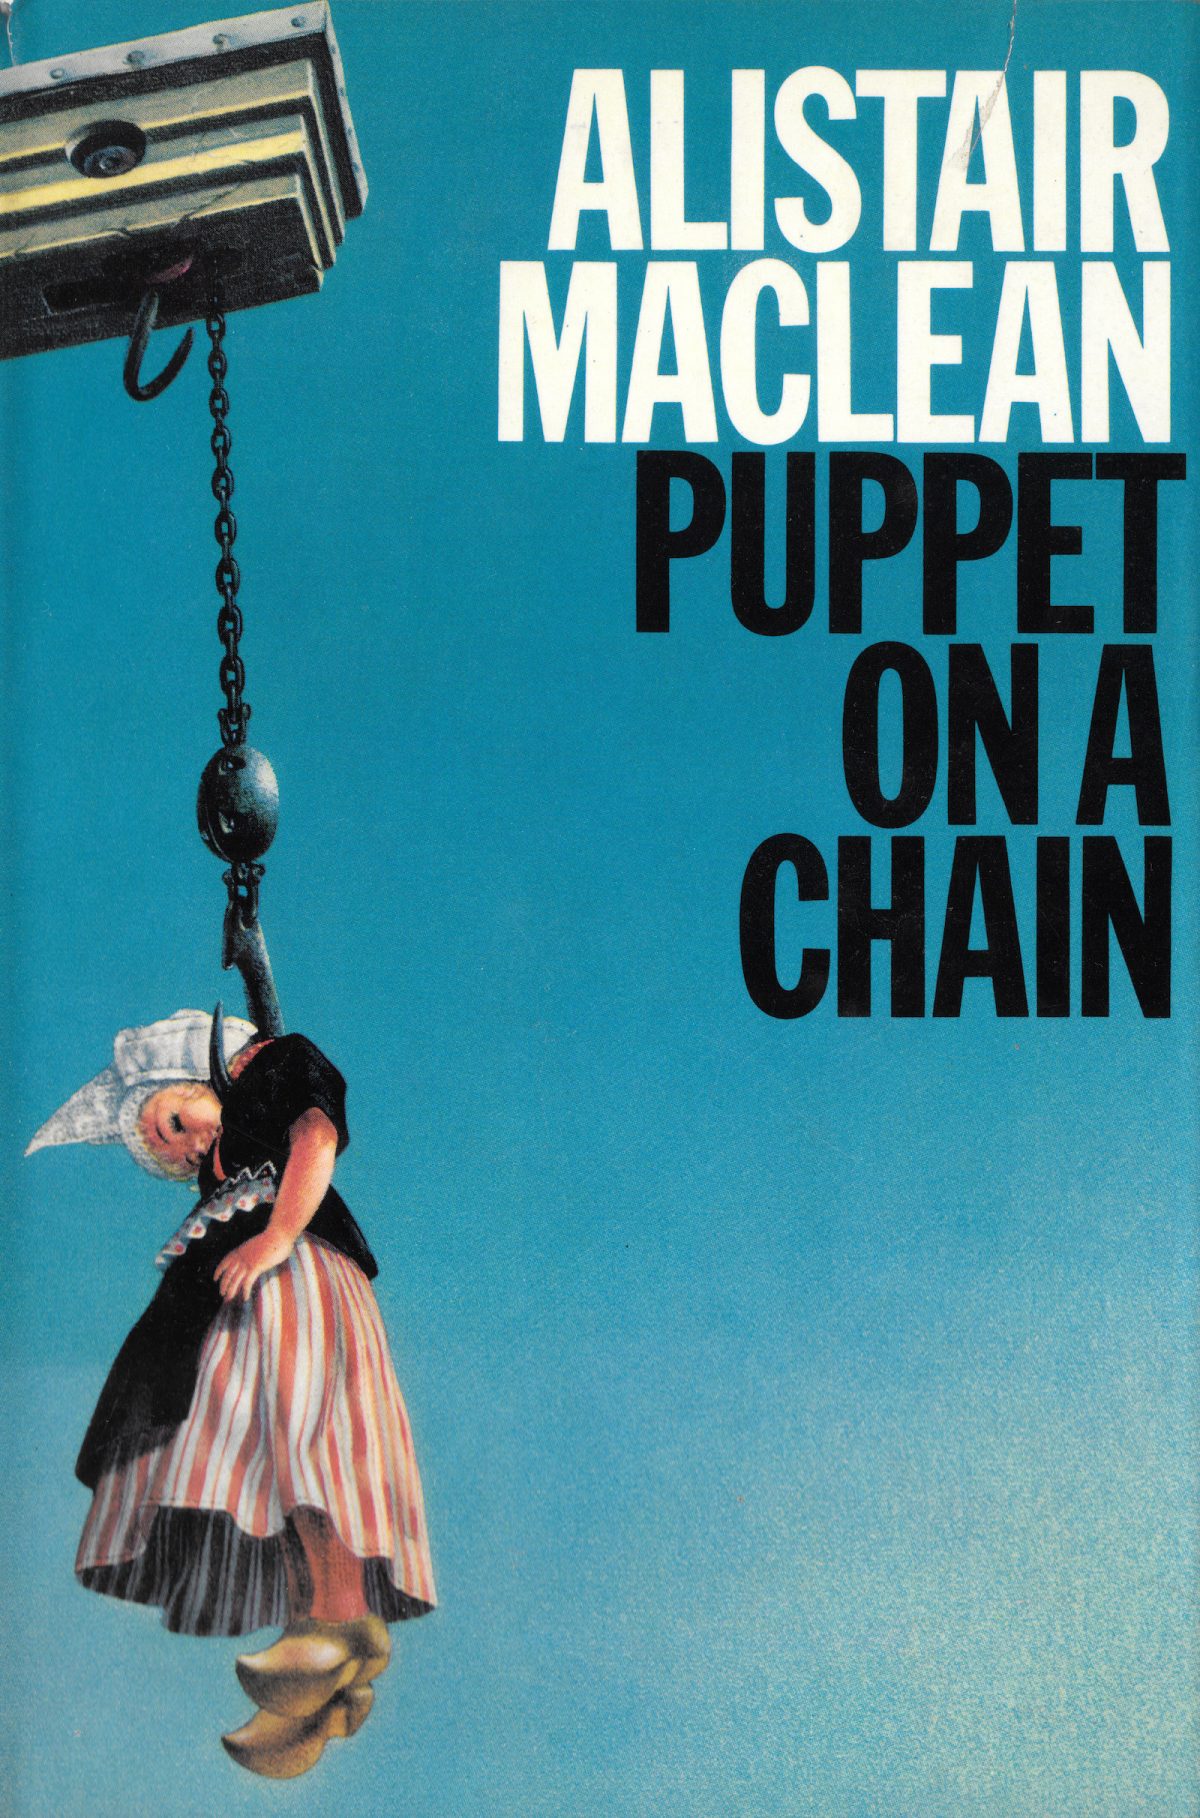 Alistair MacLean, Puppet on a Chain, books